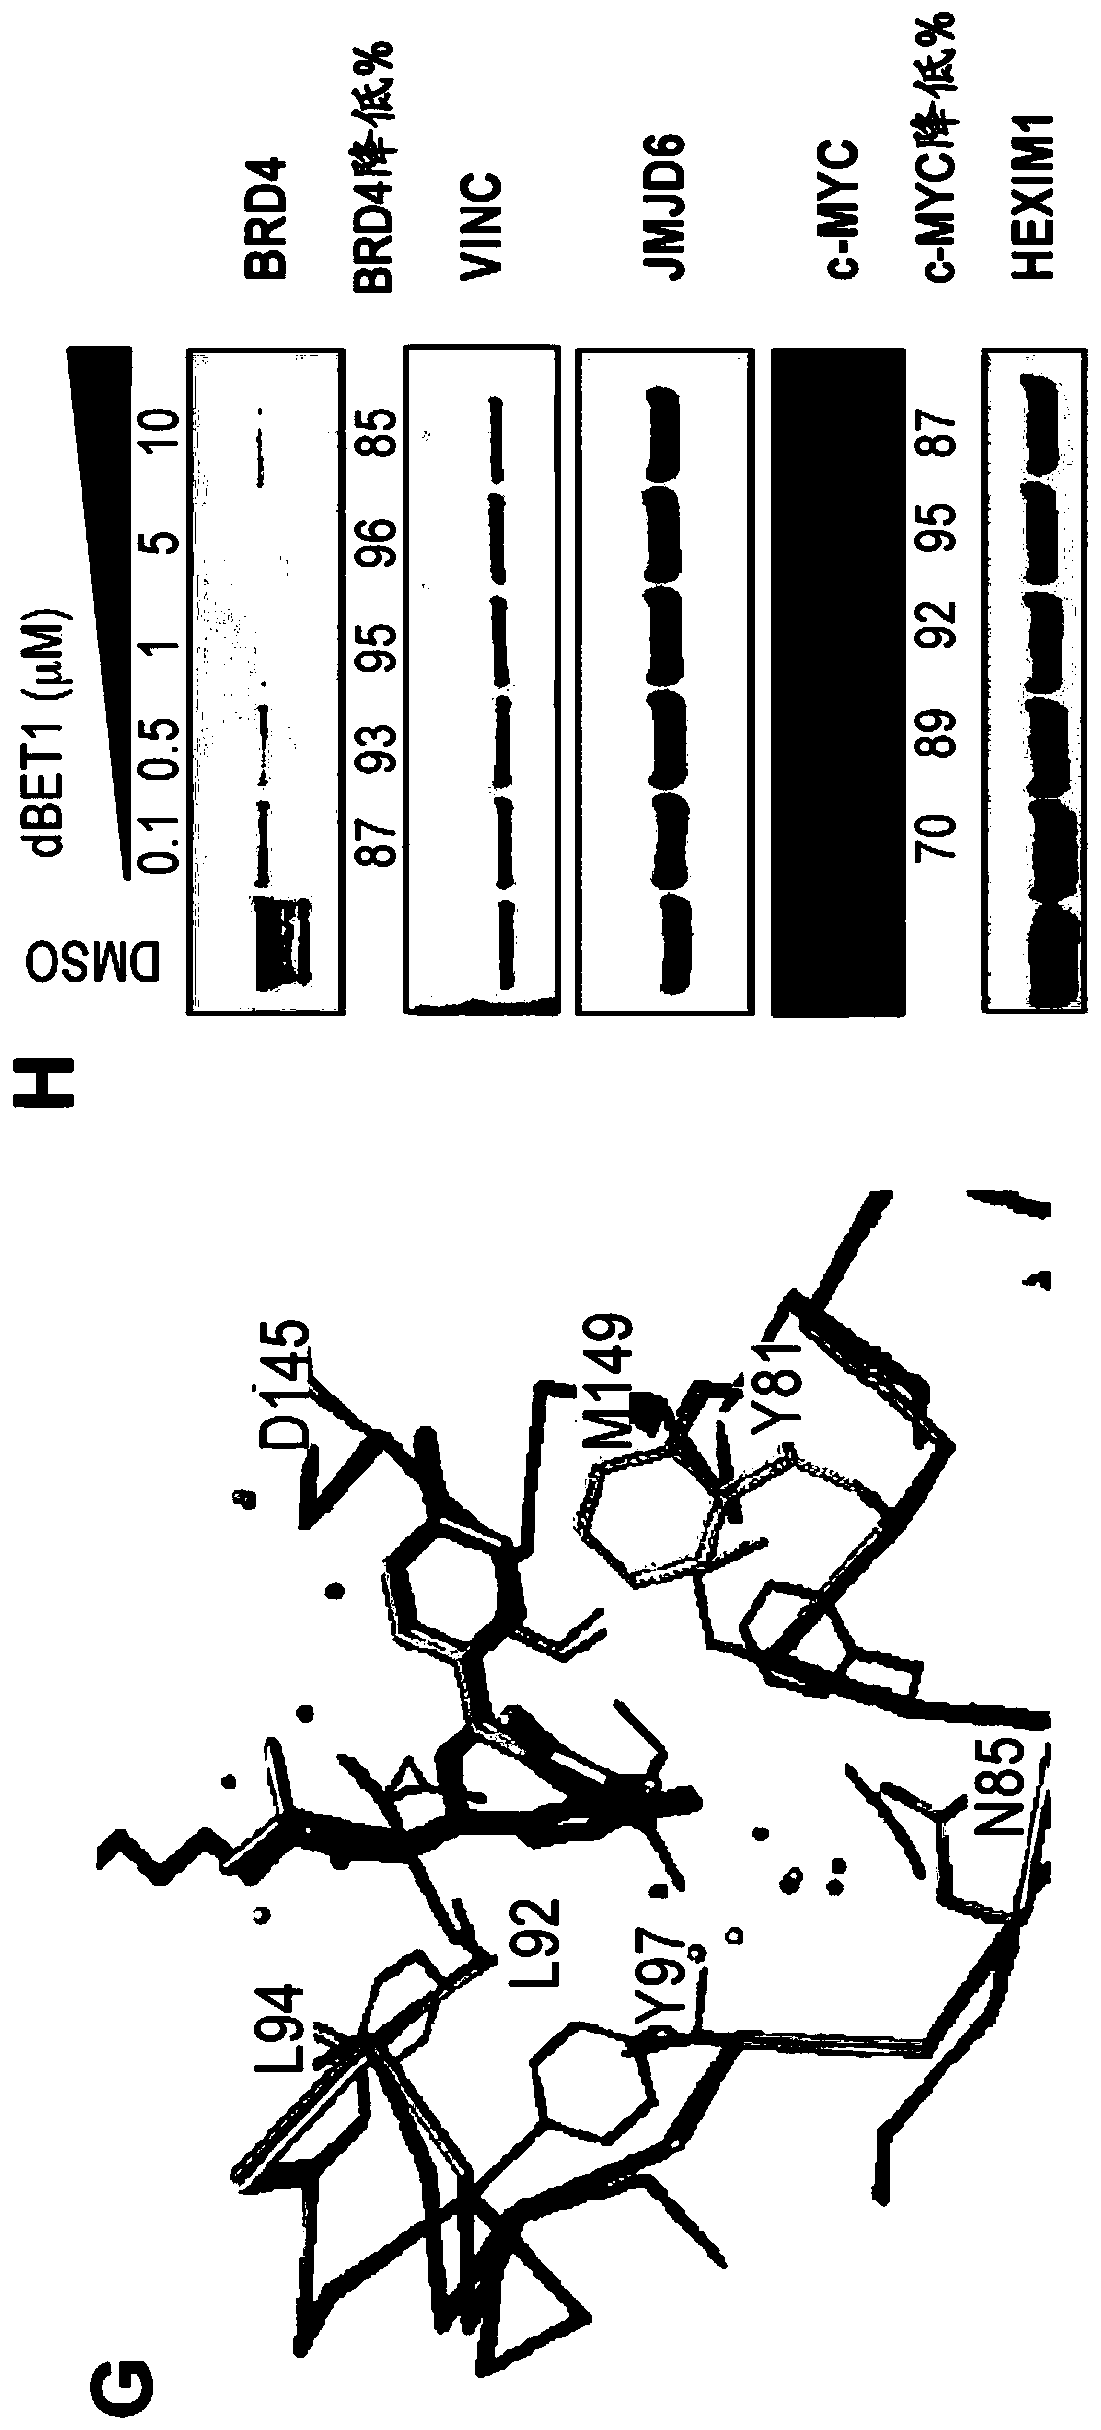 Method for inducing target protein degradation by bifunctional molecules